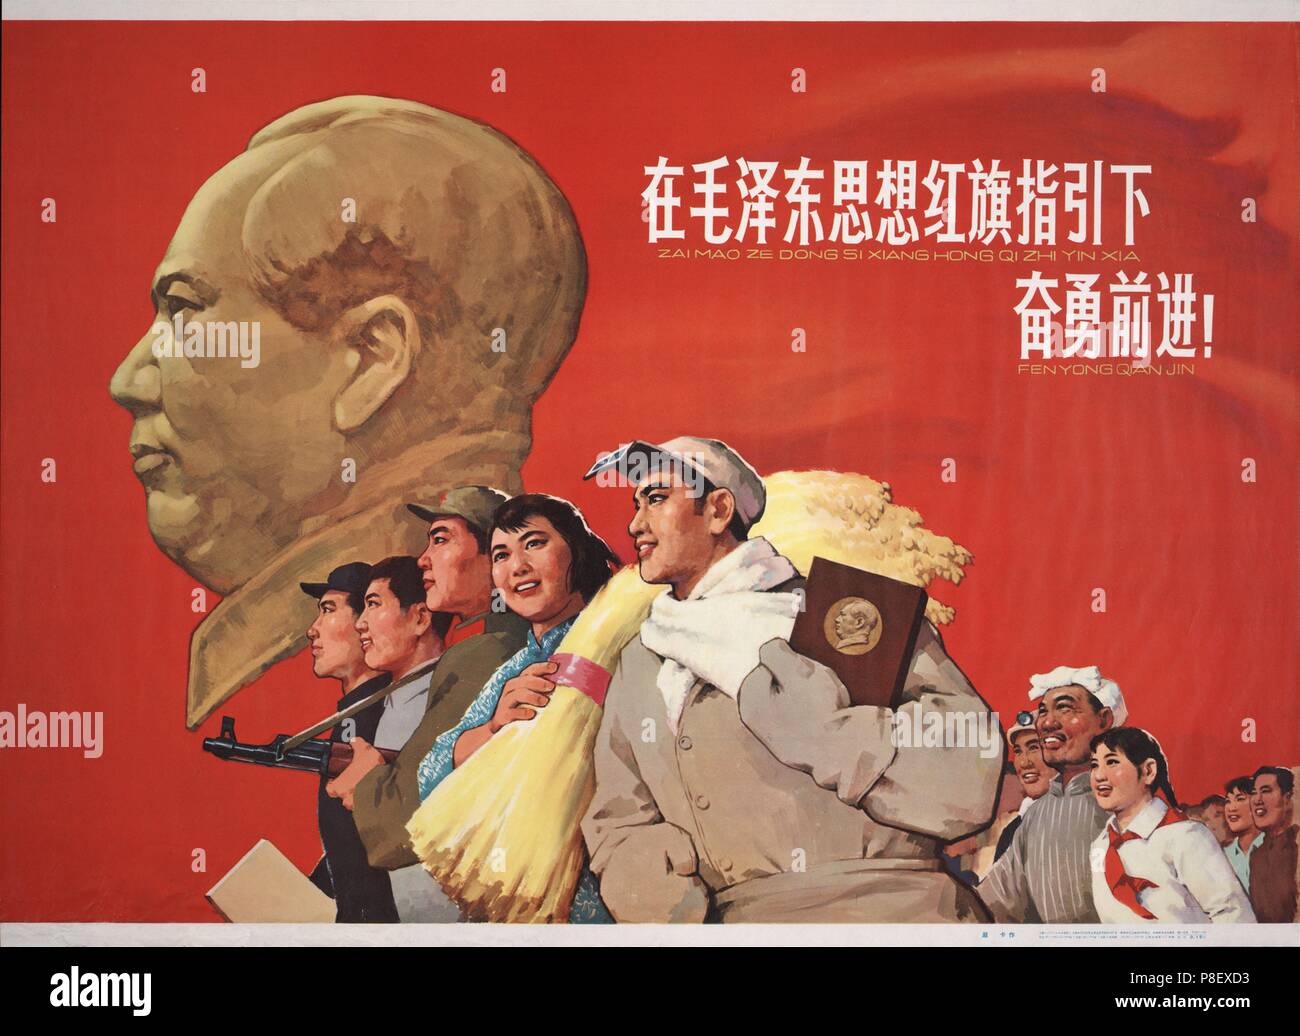 Advance Courageously Under the Guidance of the Red Flag of Mao Zedong Thought. Museum: PRIVATE COLLECTION. Stock Photo